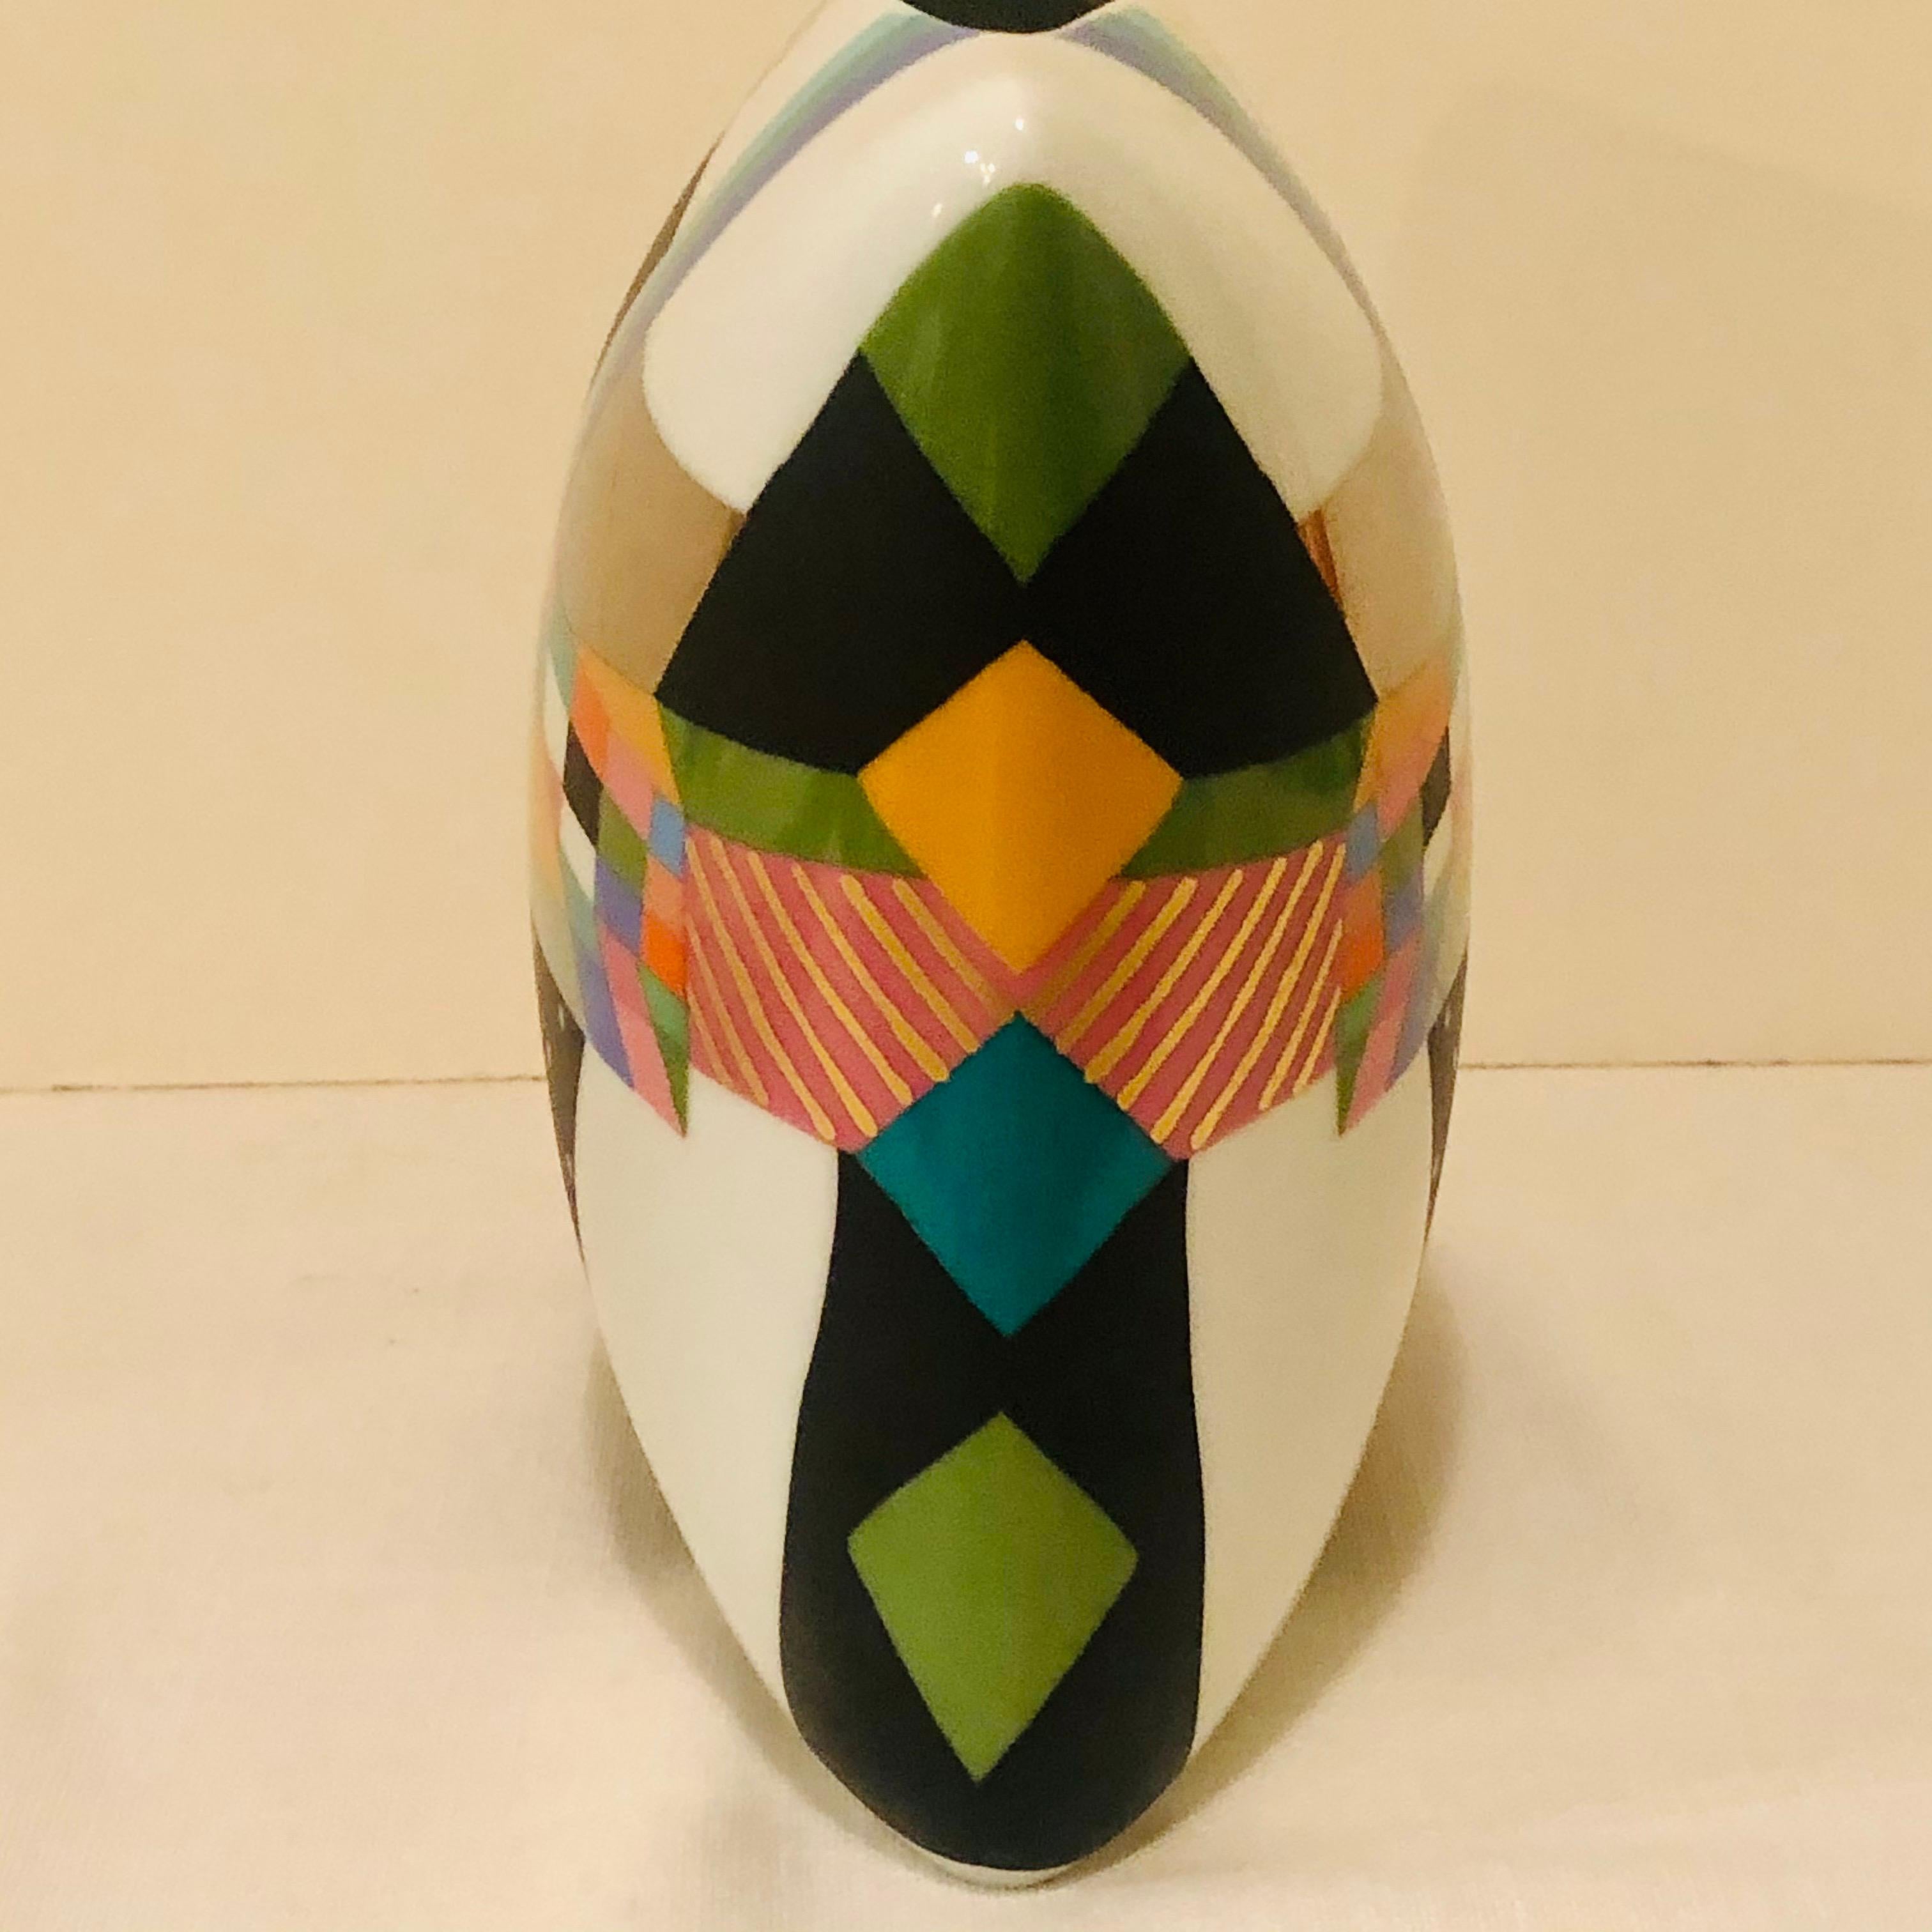 Rosenthal Art Deco Artist Signed Vase with Fabulous Abstract Colorful Painting 4